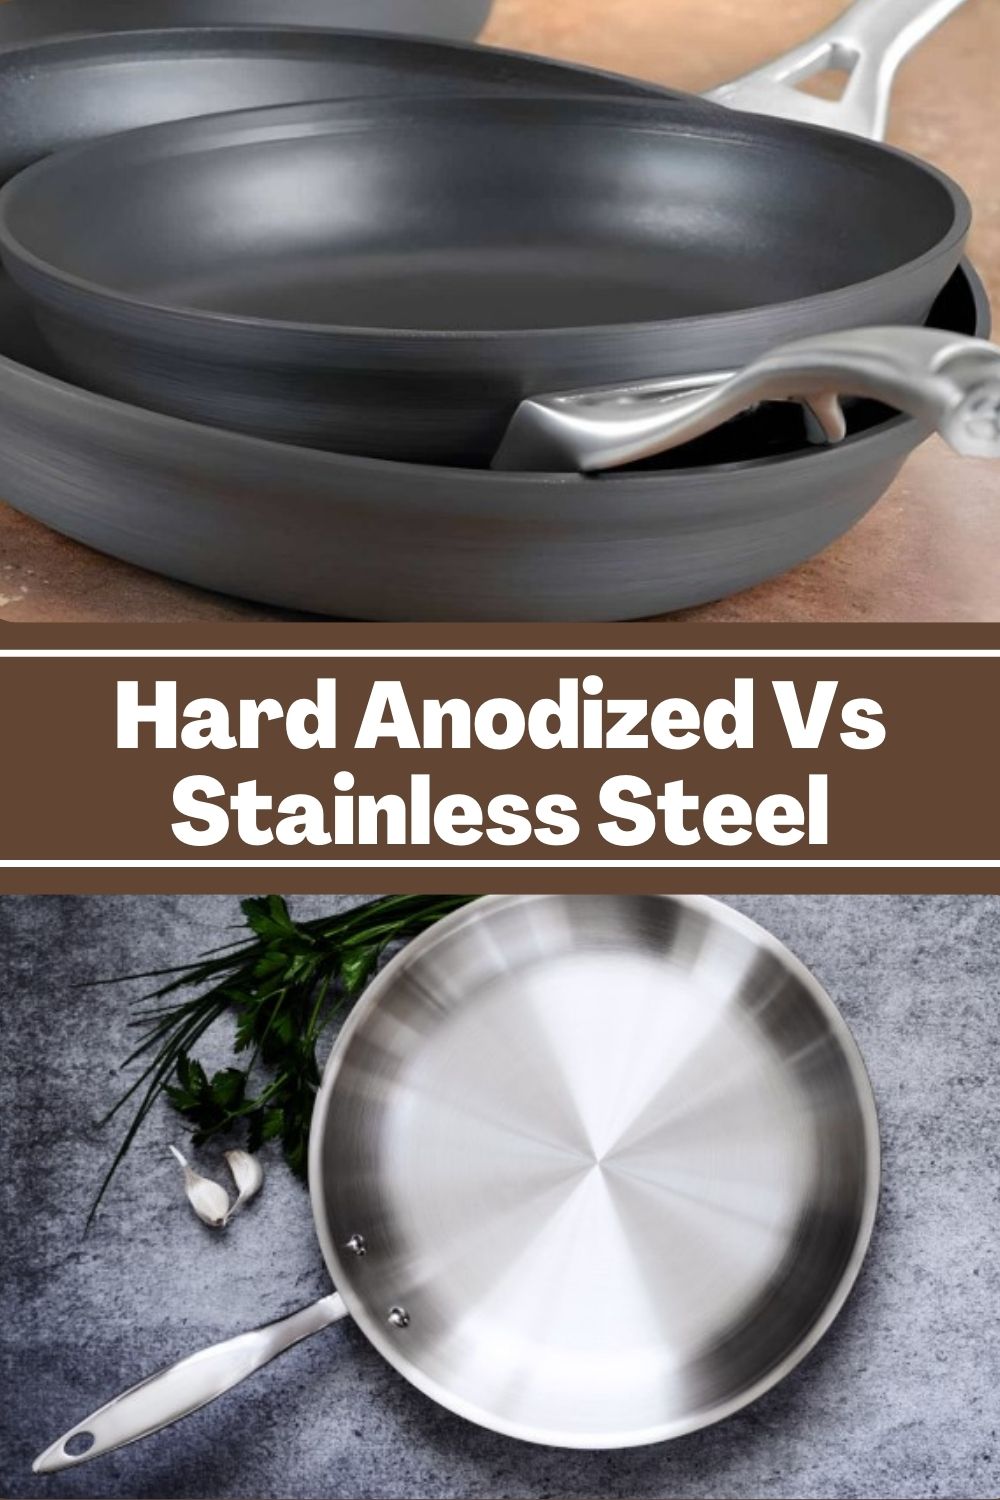 Hard-Anodized Vs Stainless Steel